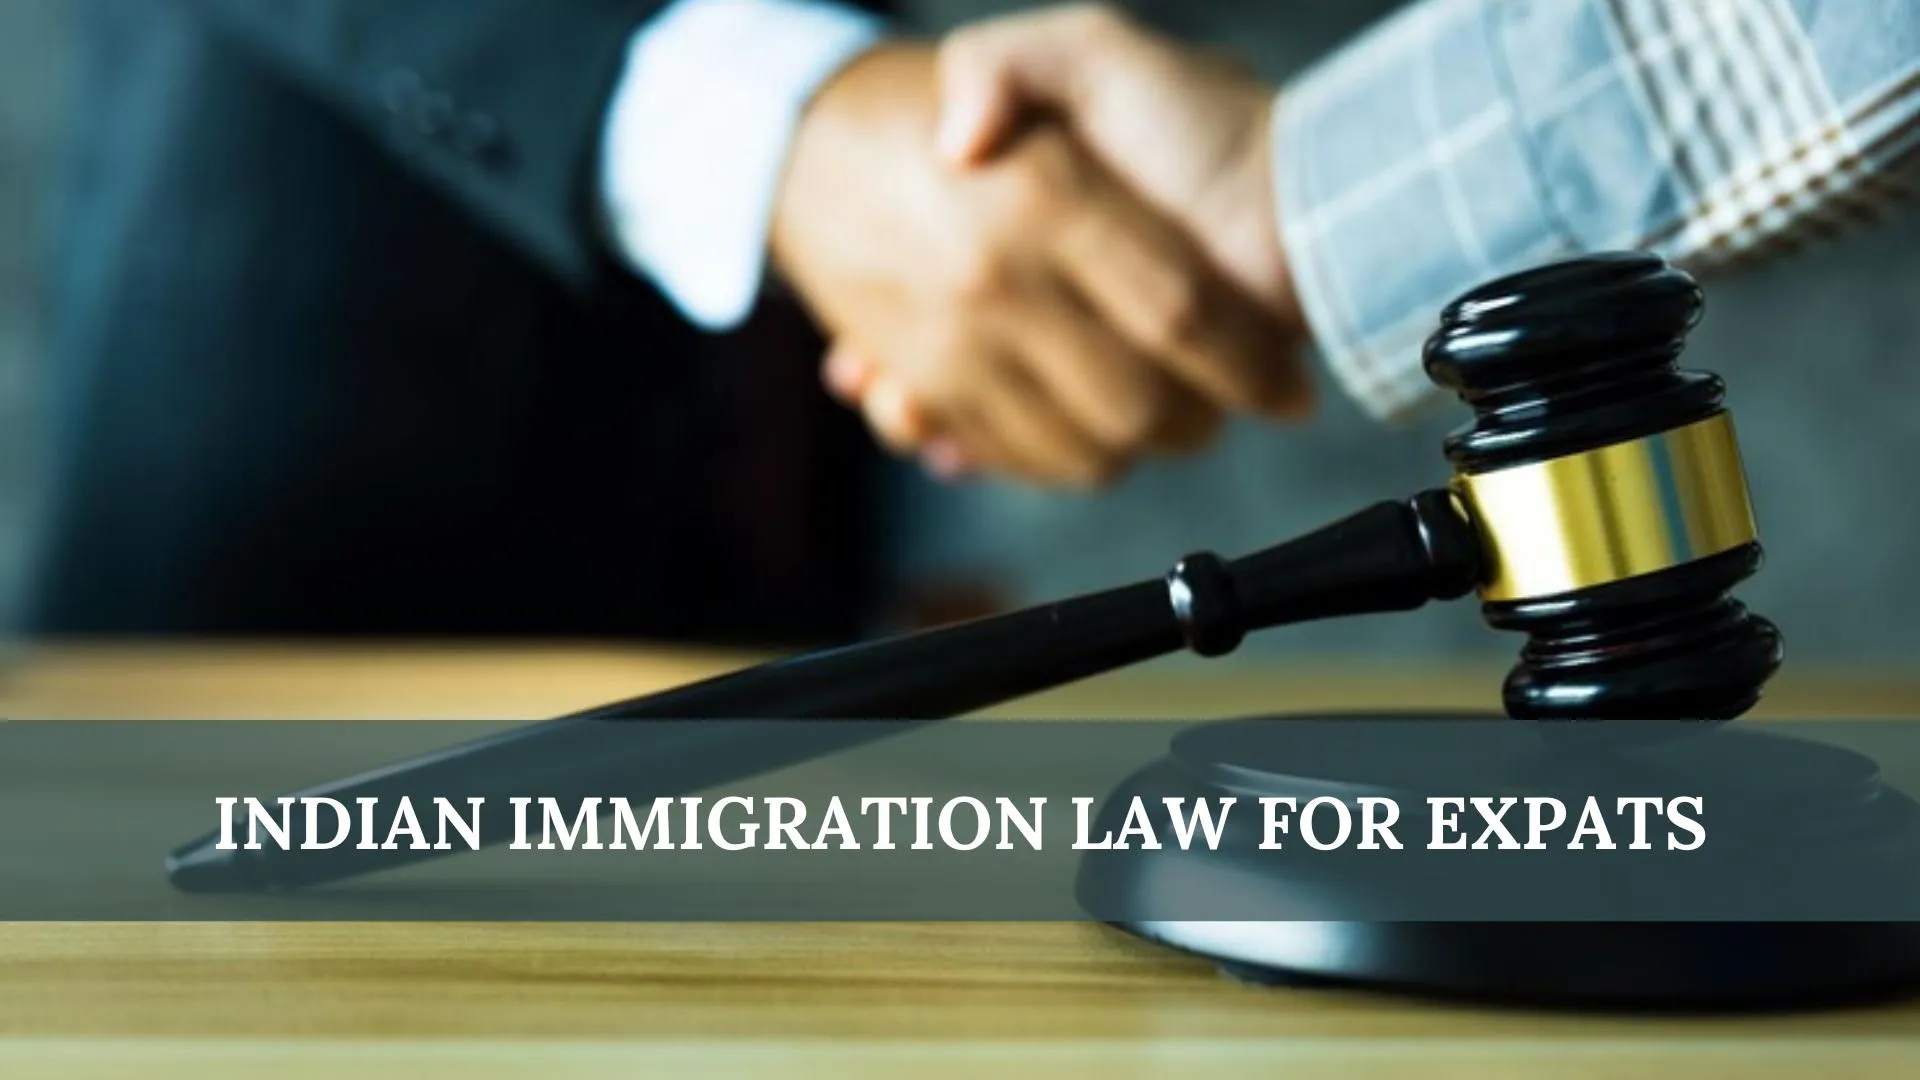 Indian immigration law for Expats- Foreigners Rules and Requirements